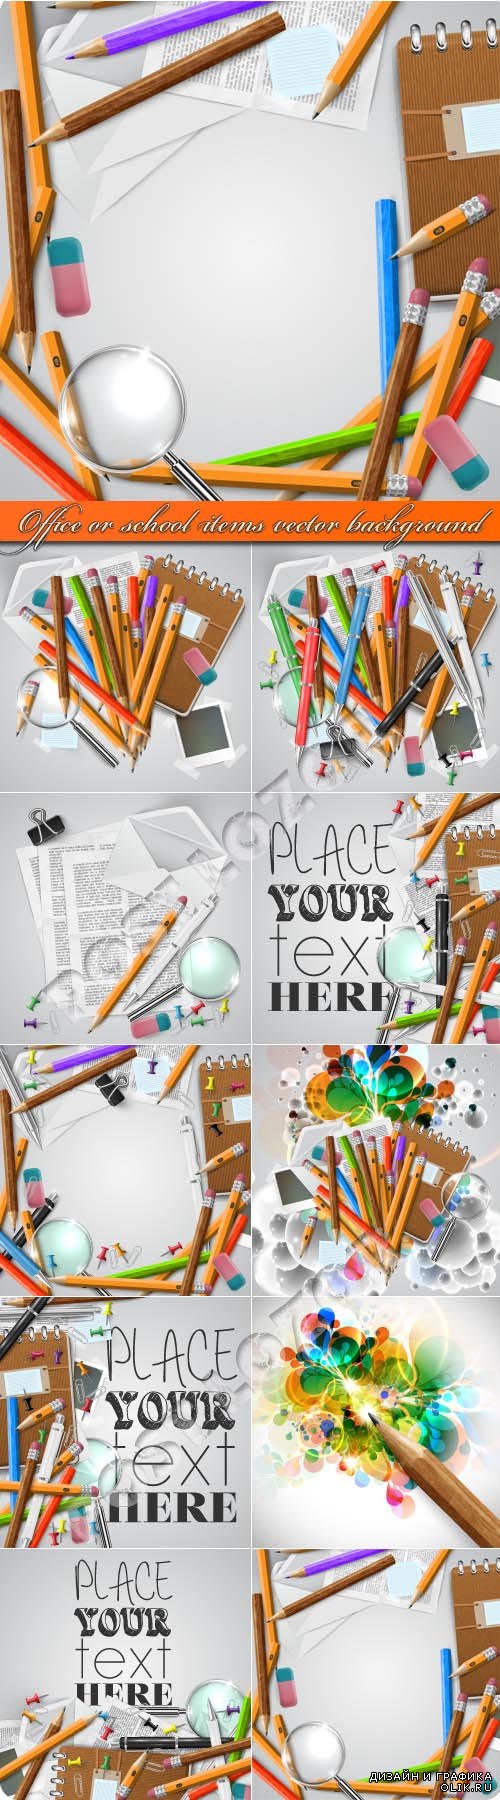 Office or school items vector background